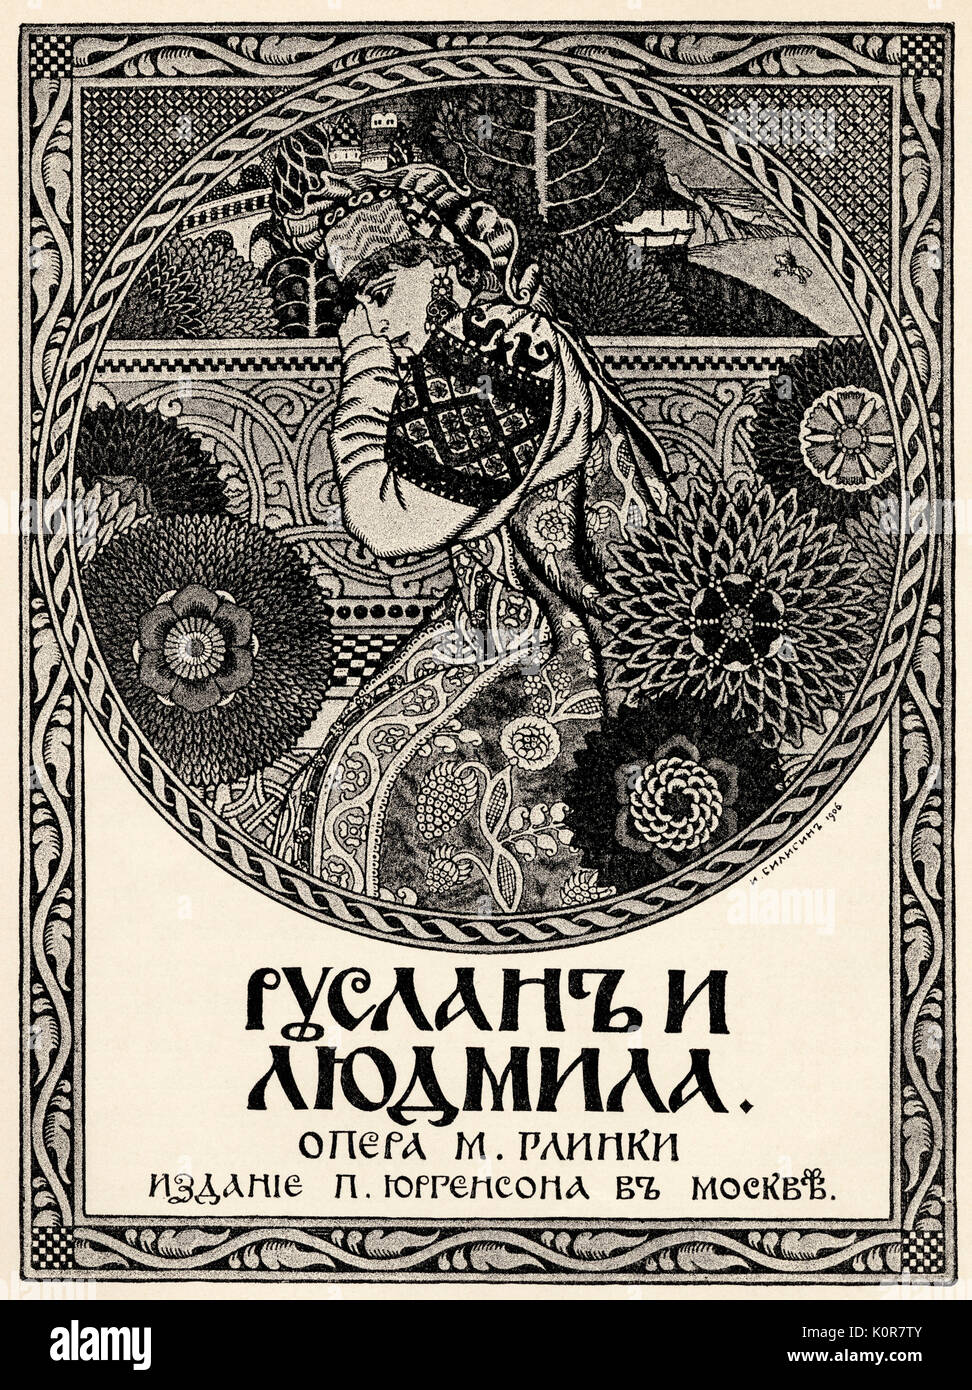 Mikhail I. Glinka's 'Ruslan and Ludmilla' - title page of score. Published in 1842. Russian composer (1804-1857) Stock Photo